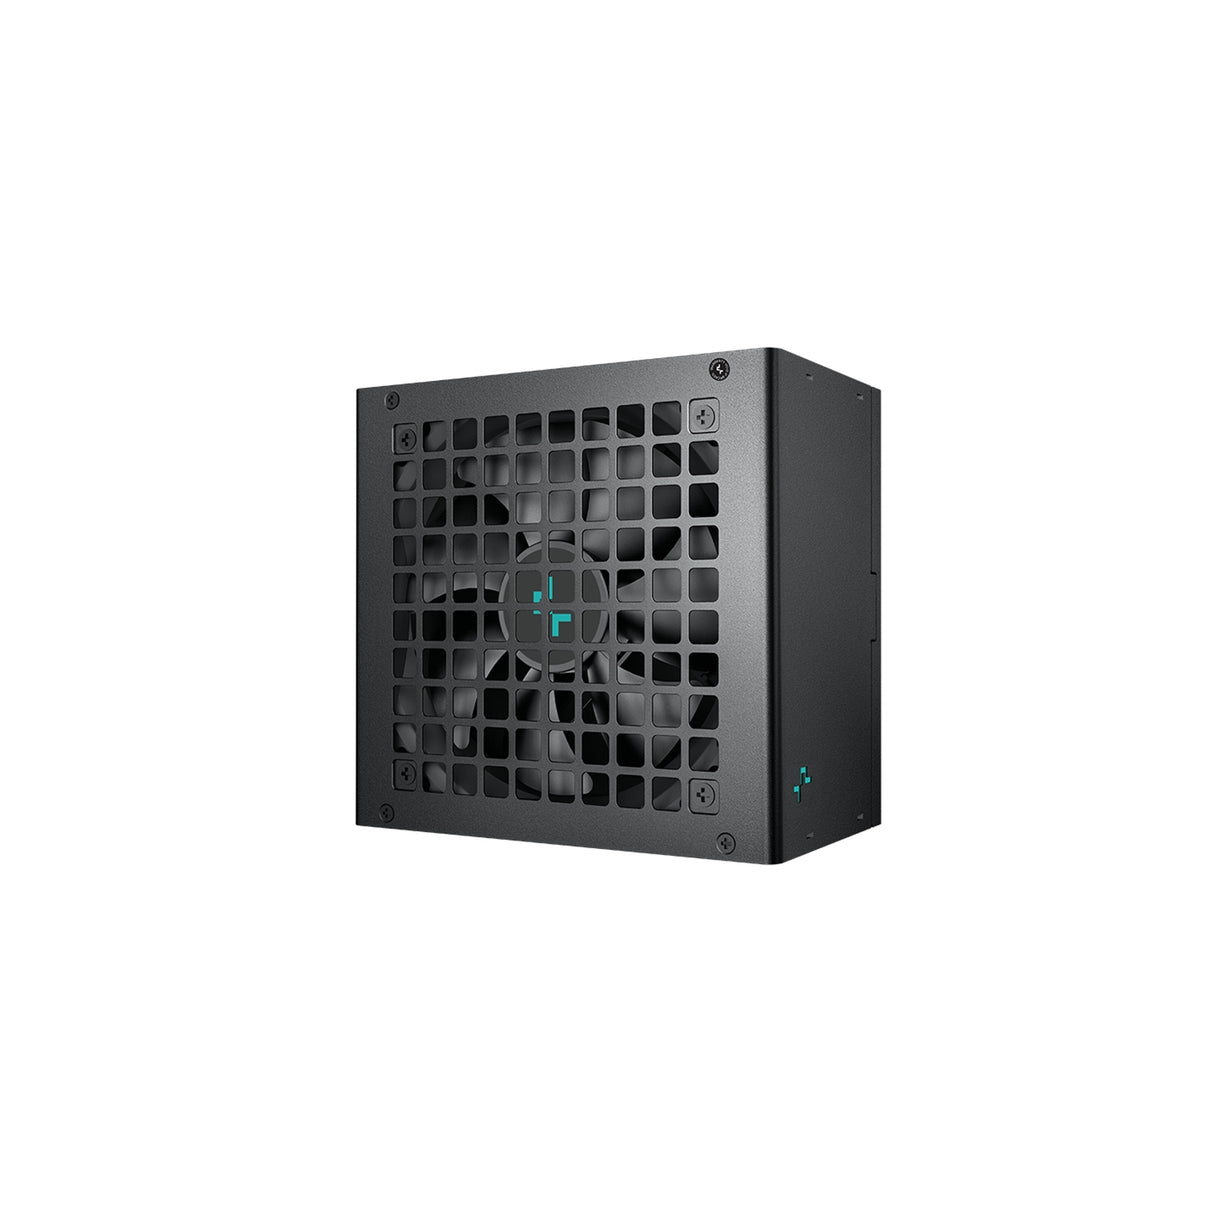 DeepCool PL750D 750W PSU, 120mm Silent Hydro Bearing Fan, 80 PLUS Bronze, Non Modular, UK Plug, Flat Black Cables, Stable with Low Noise Performance